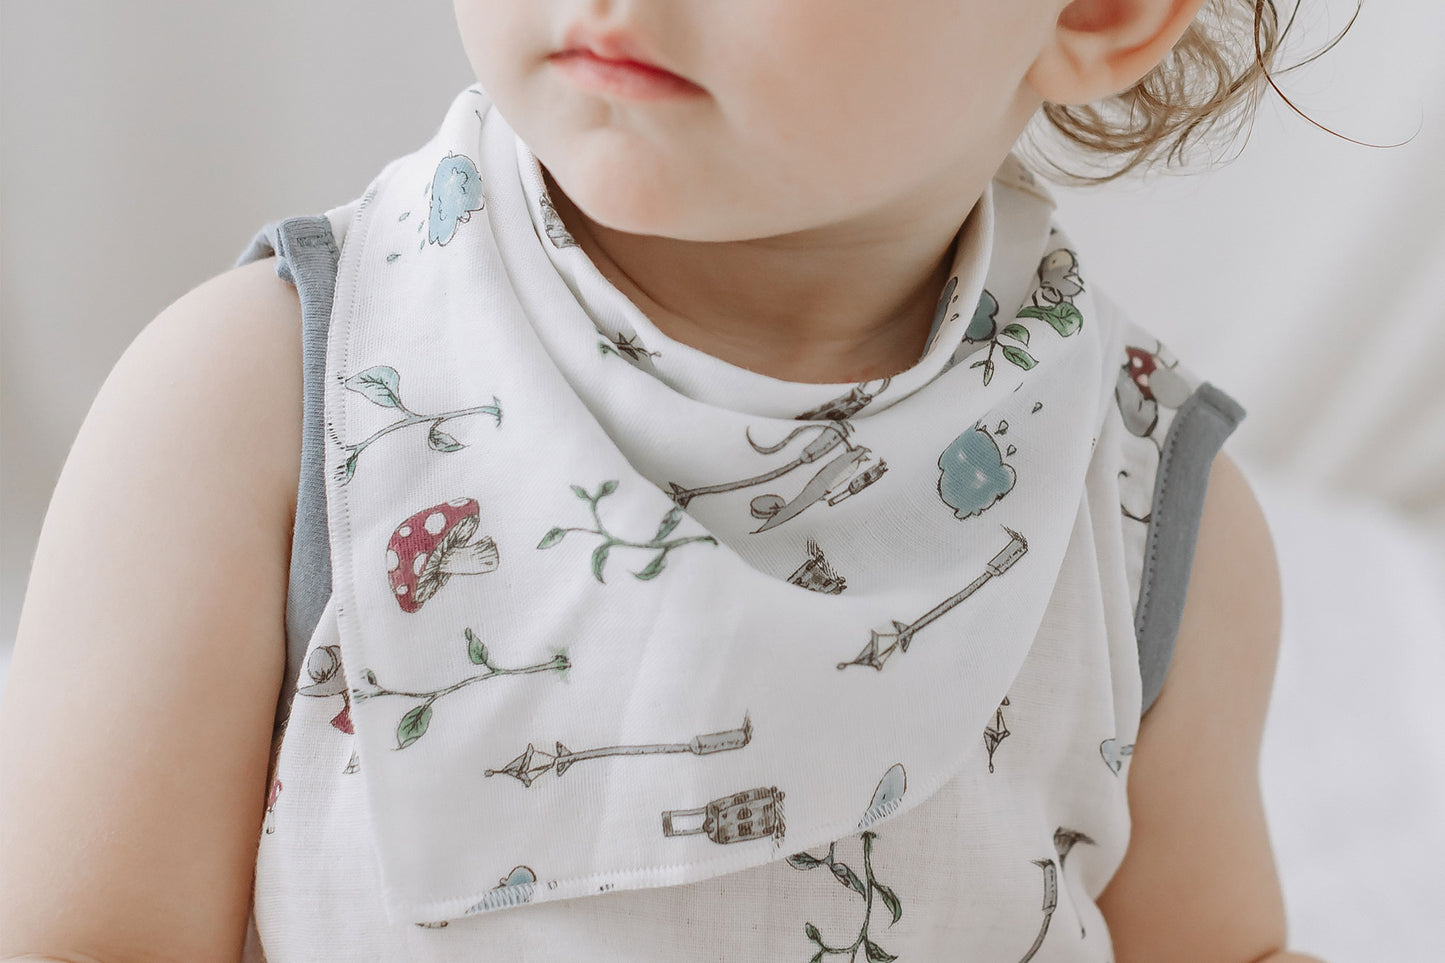 Baby Bandana Bib (Bamboo) - The Town Mouse & The Country Mouse